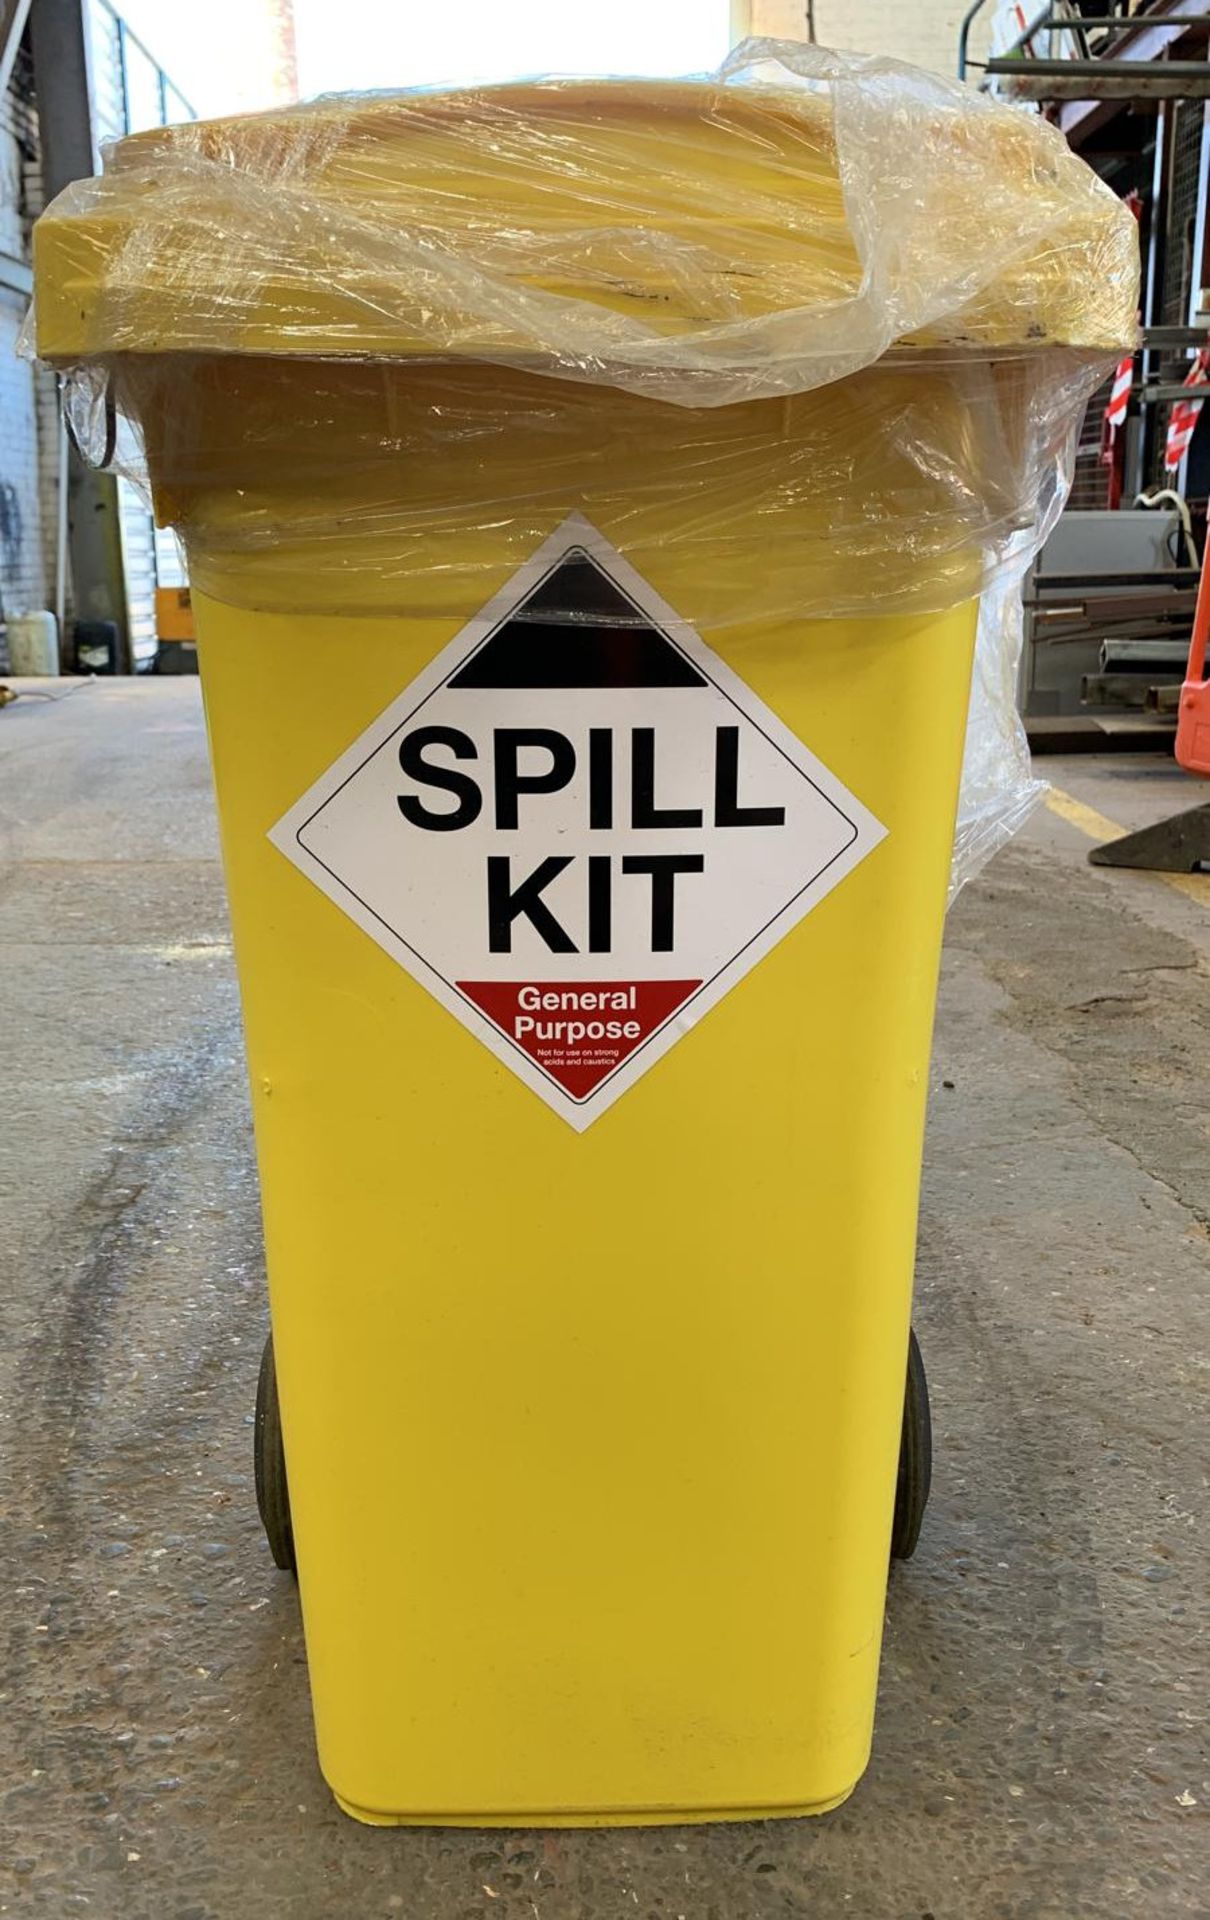 1 X Yellow General Purpose Spill Kit - Ref: 21 - CL464 - Location: Liverpool L19 - Image 2 of 2